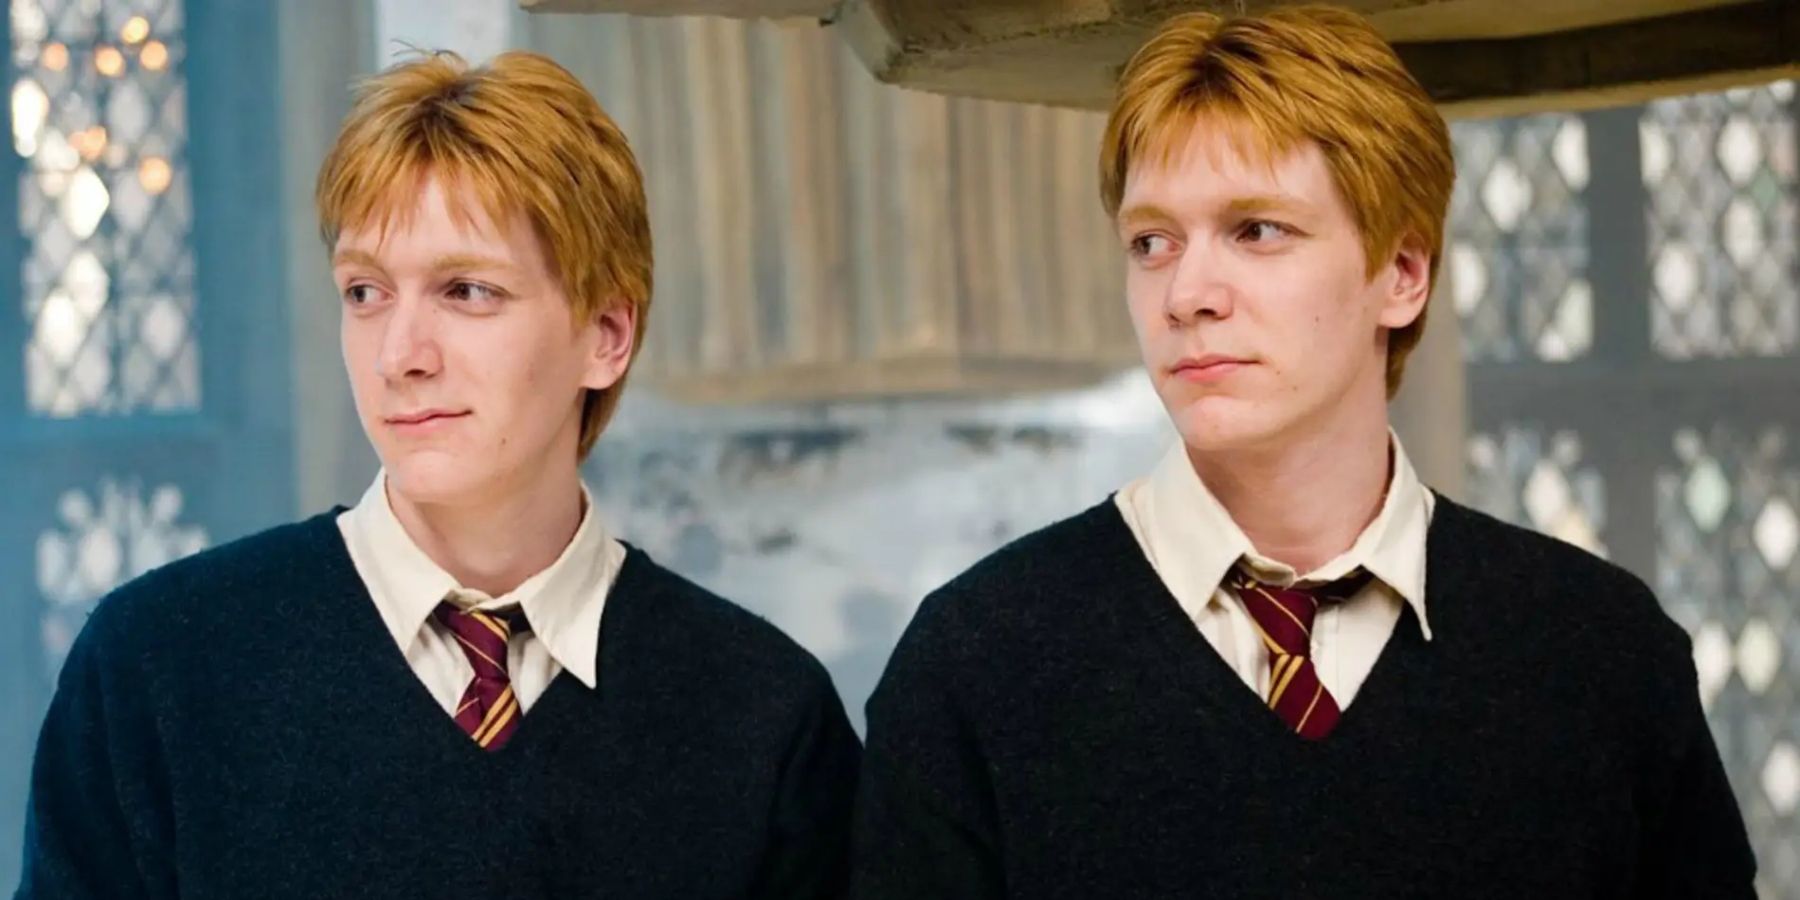 What Are the Differences Between Fred and George Weasley?